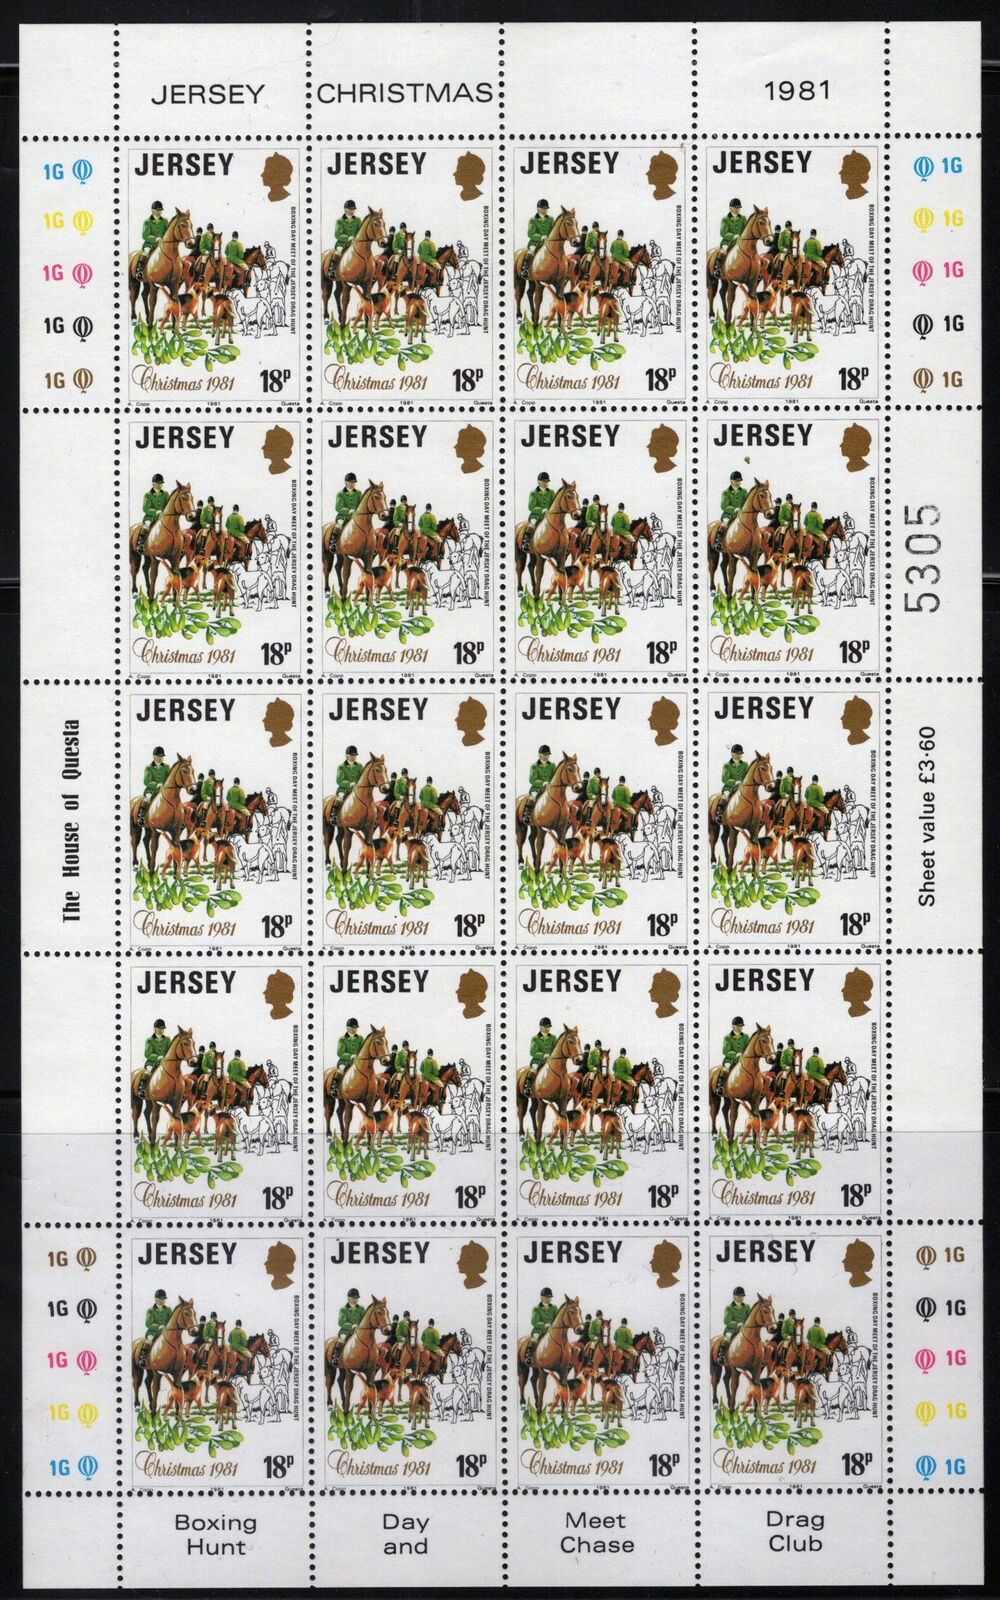 Jersey 282-284 MNH Christmas Sheets Horses Trees Stained Glass 110422SL07